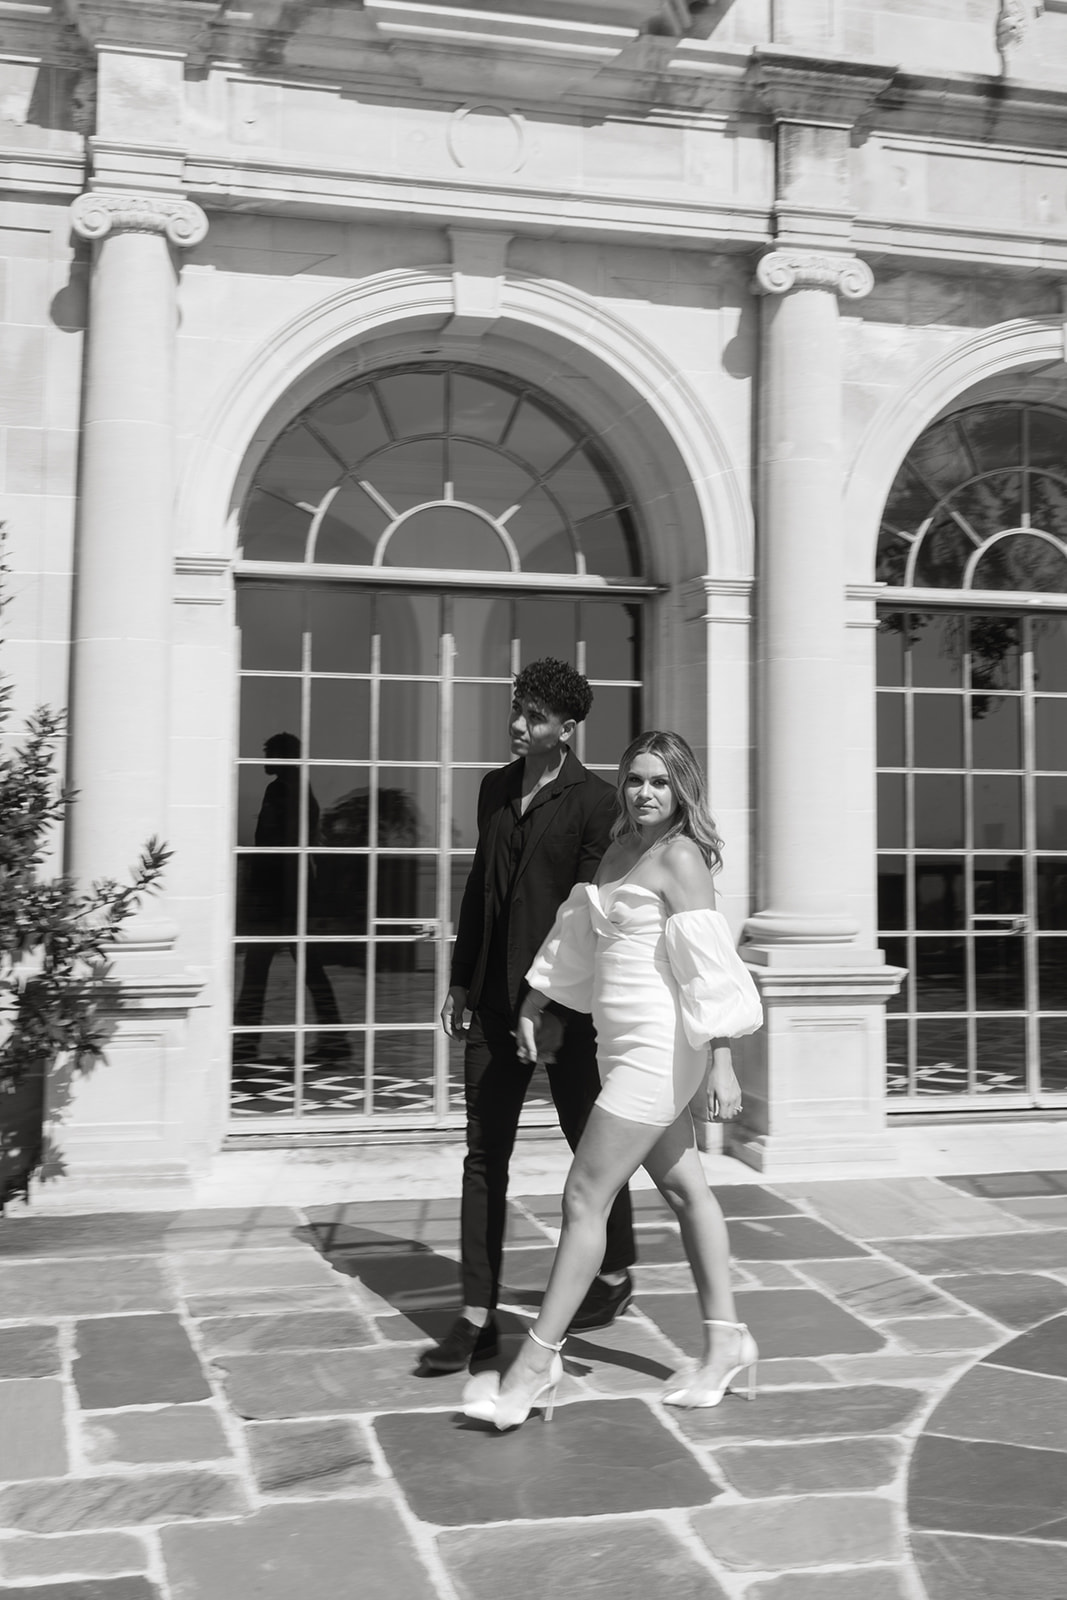 greystone mansion beverly hills los angeles southern california engagement best photoshoot locations california beaches